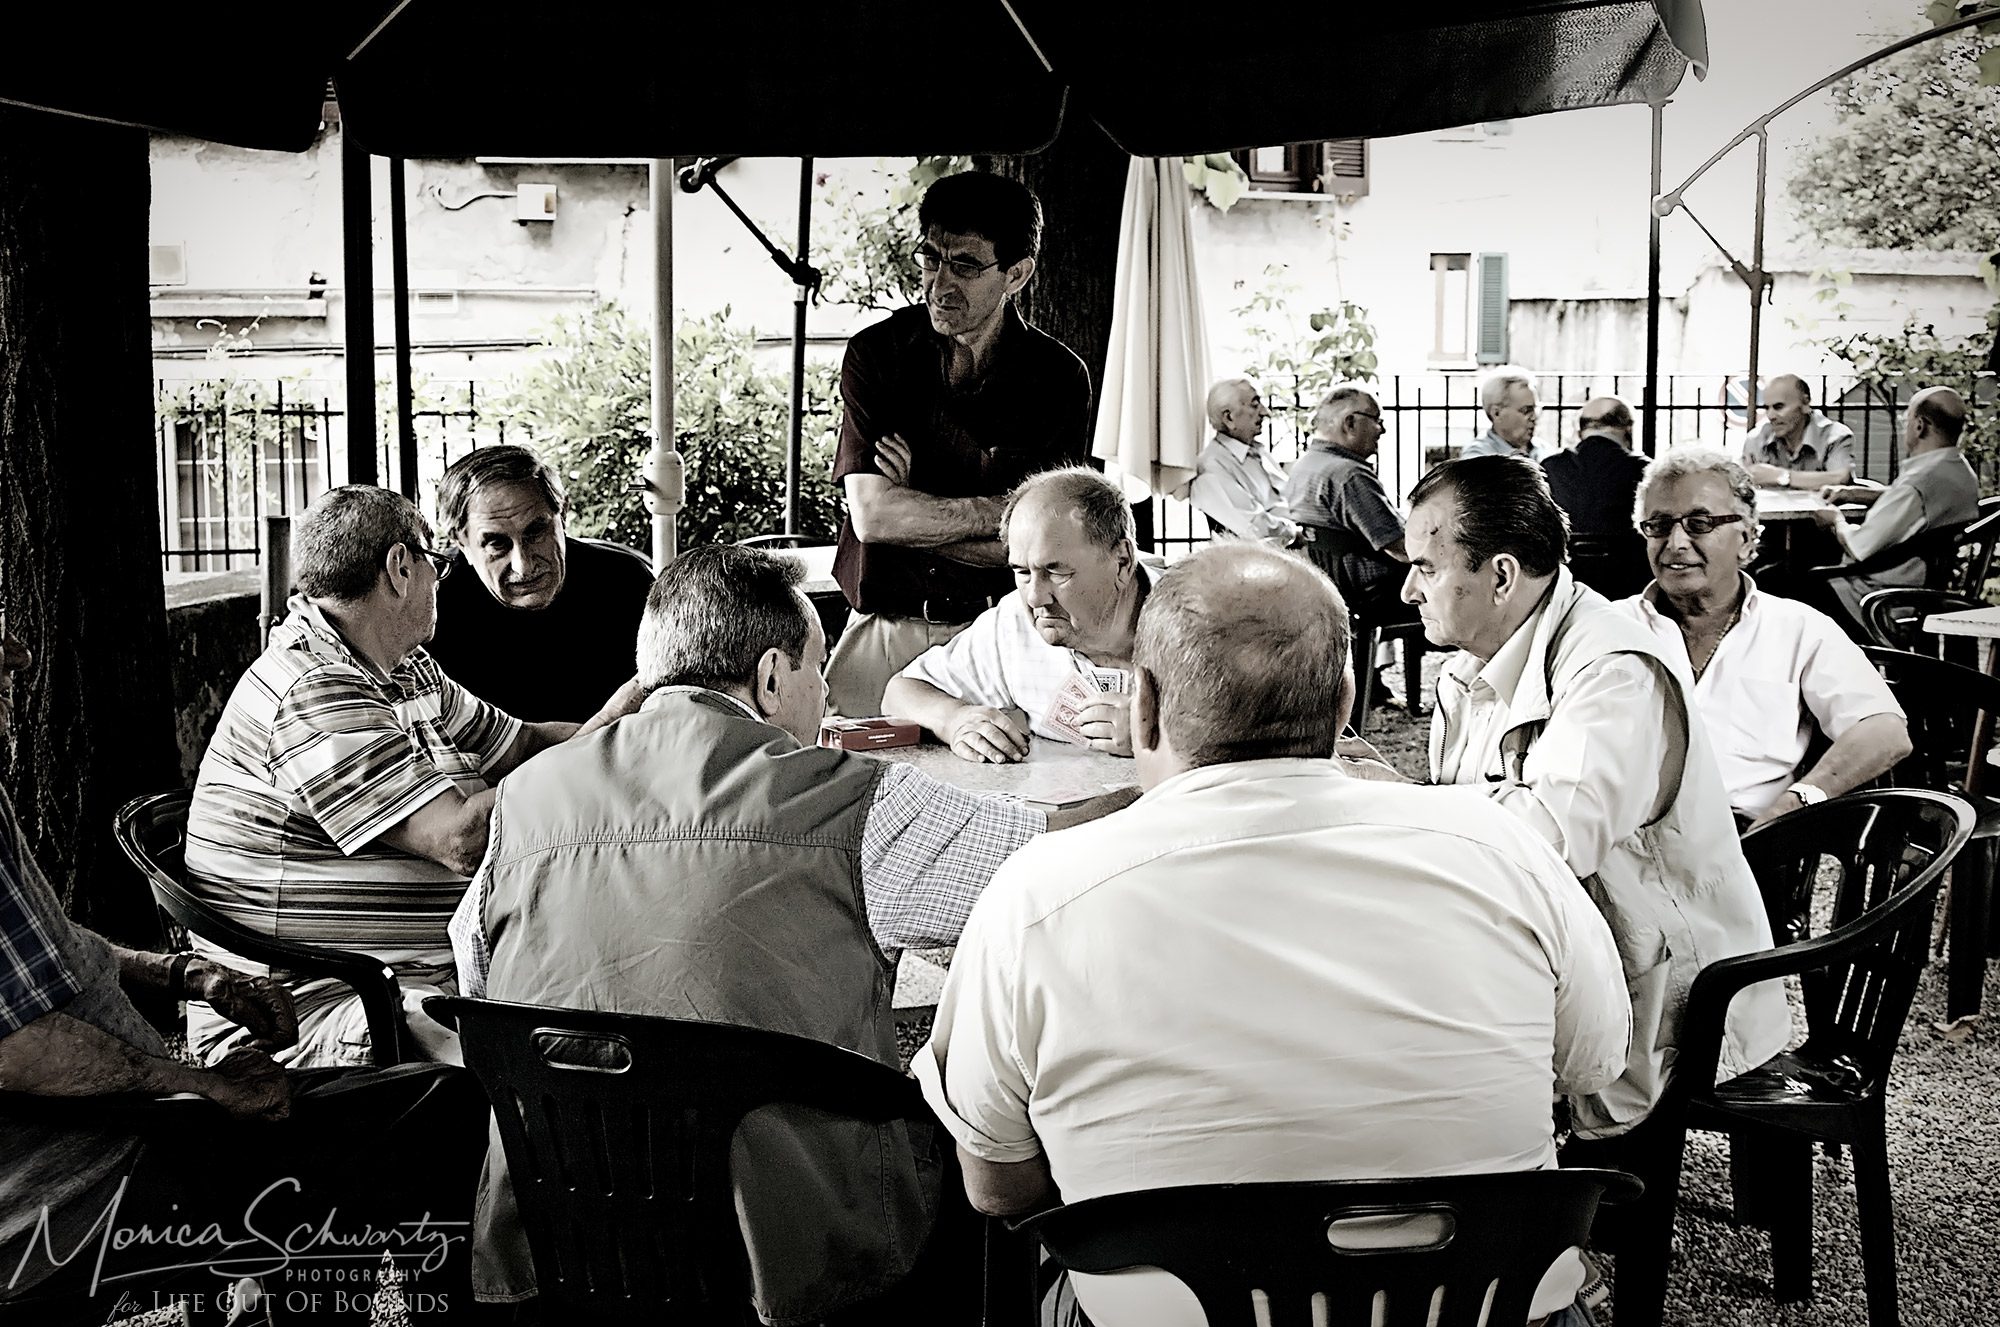 Old-Italian-men-hanging-out-at-the-circolino-on-a-summer-afternoon-in-SantAmbrogio-Varese-Italy